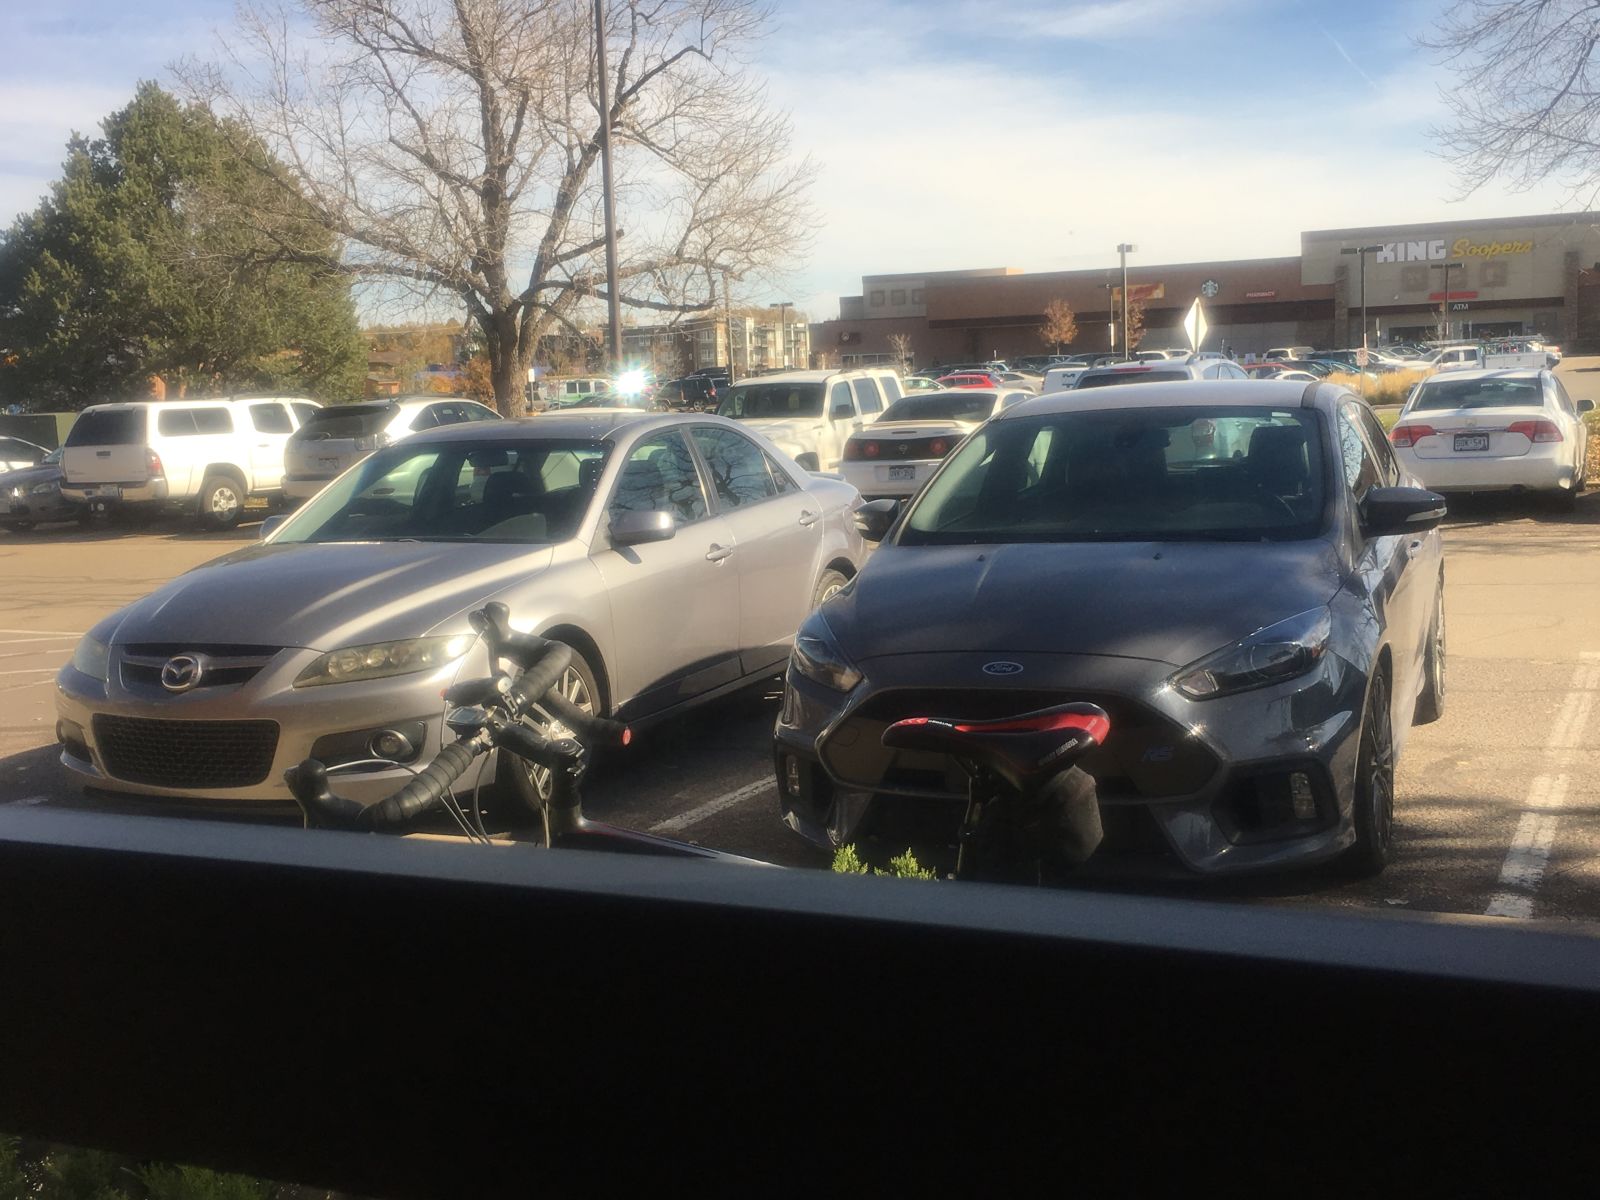 My Mazdaspeed 6 found a fellow turbo AWD parking pal in this Focus RS.